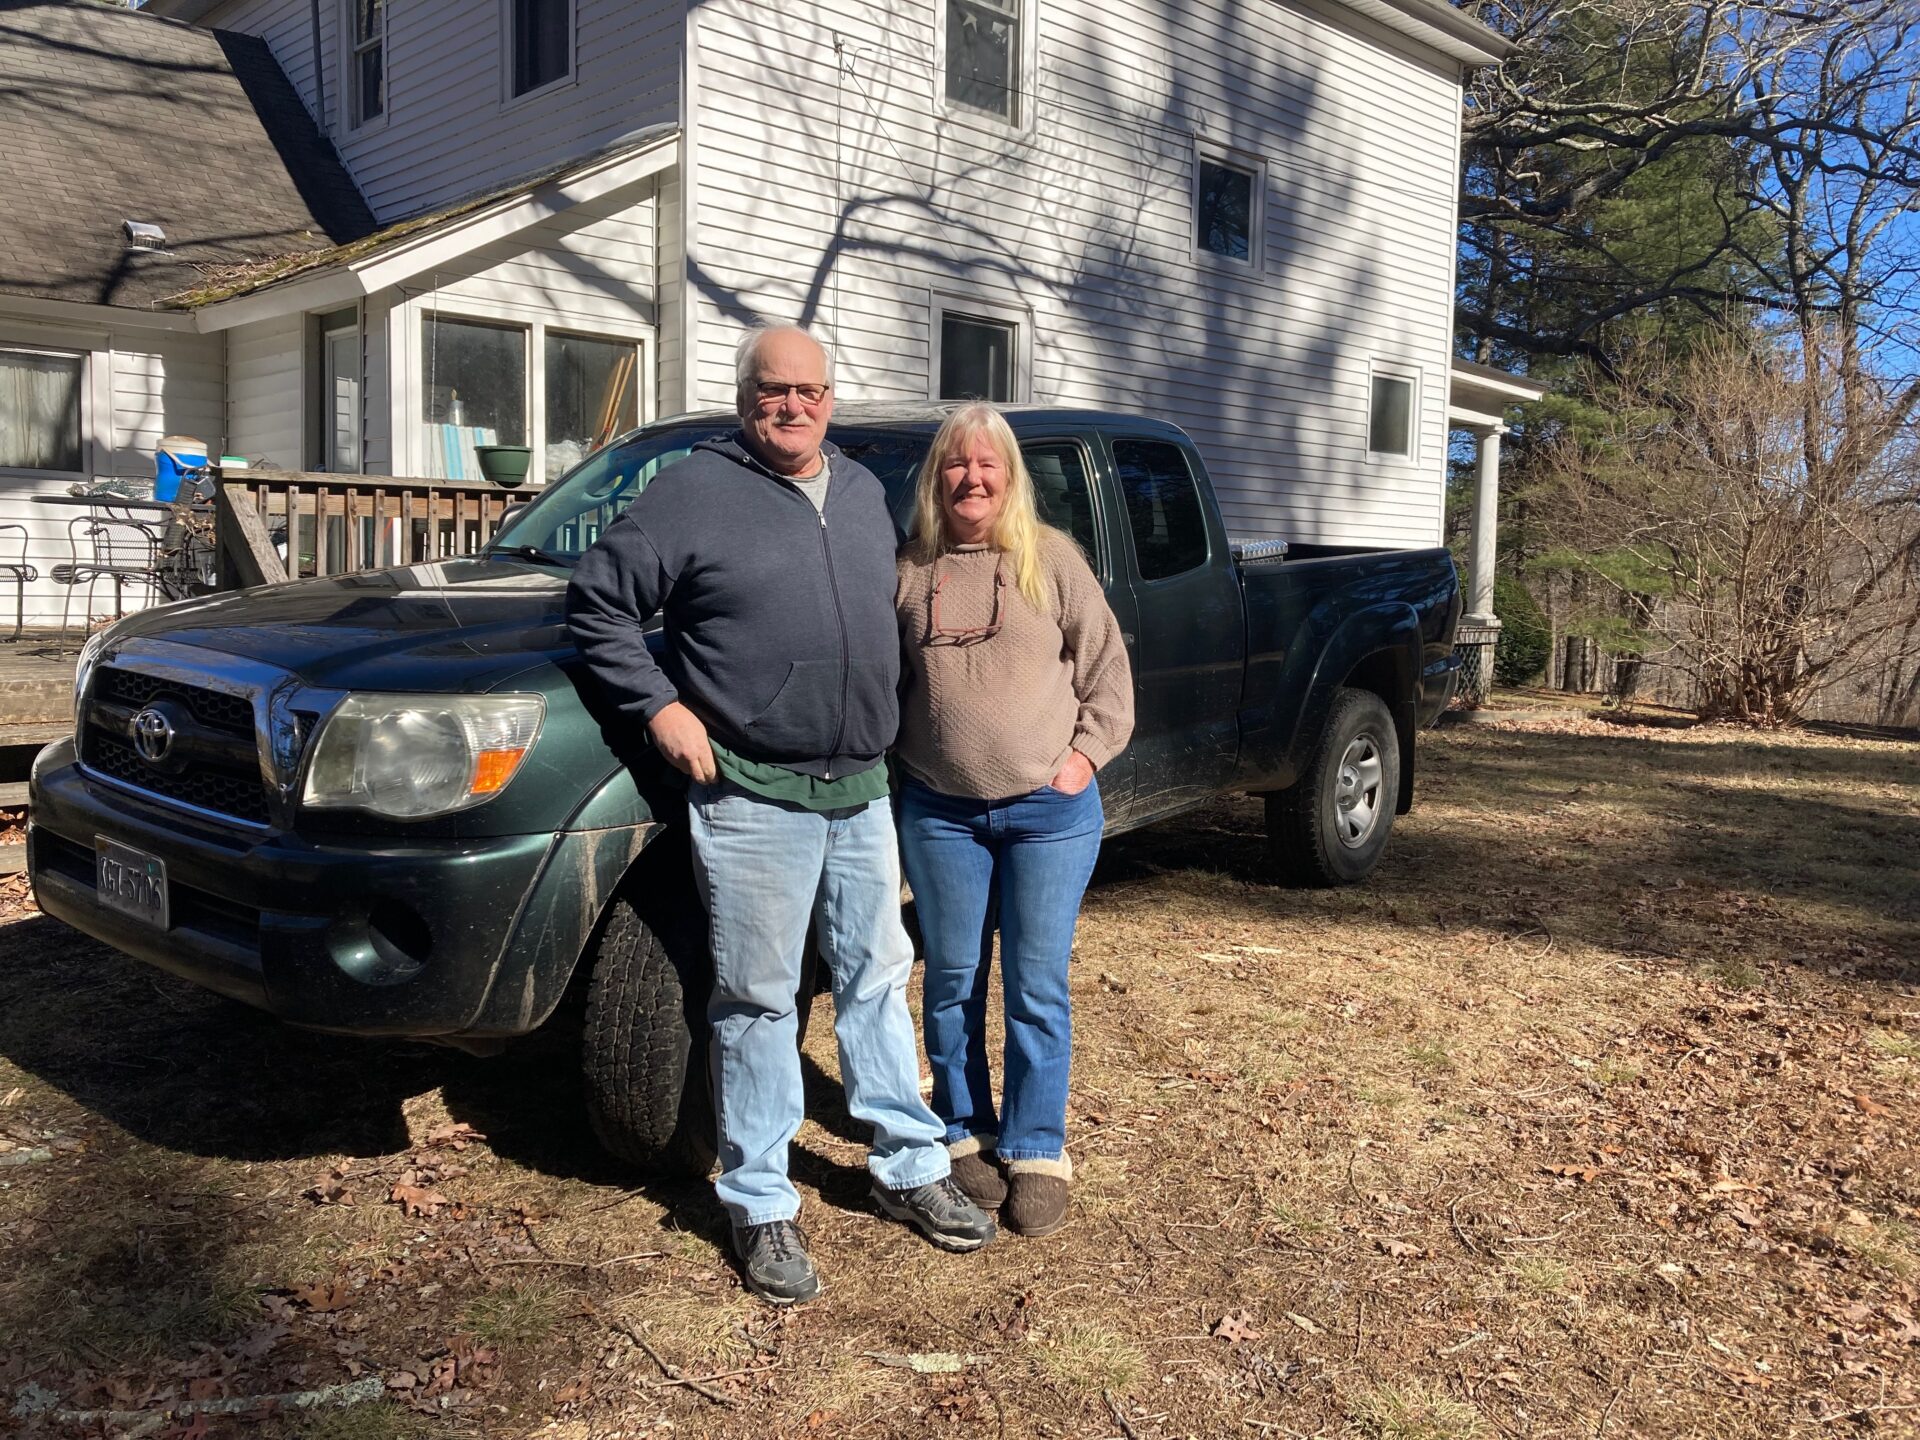 Two older people stand in front of a truck outside their home. They both are wearing jeans and long-sleeved shirts. Behind them is a white house.